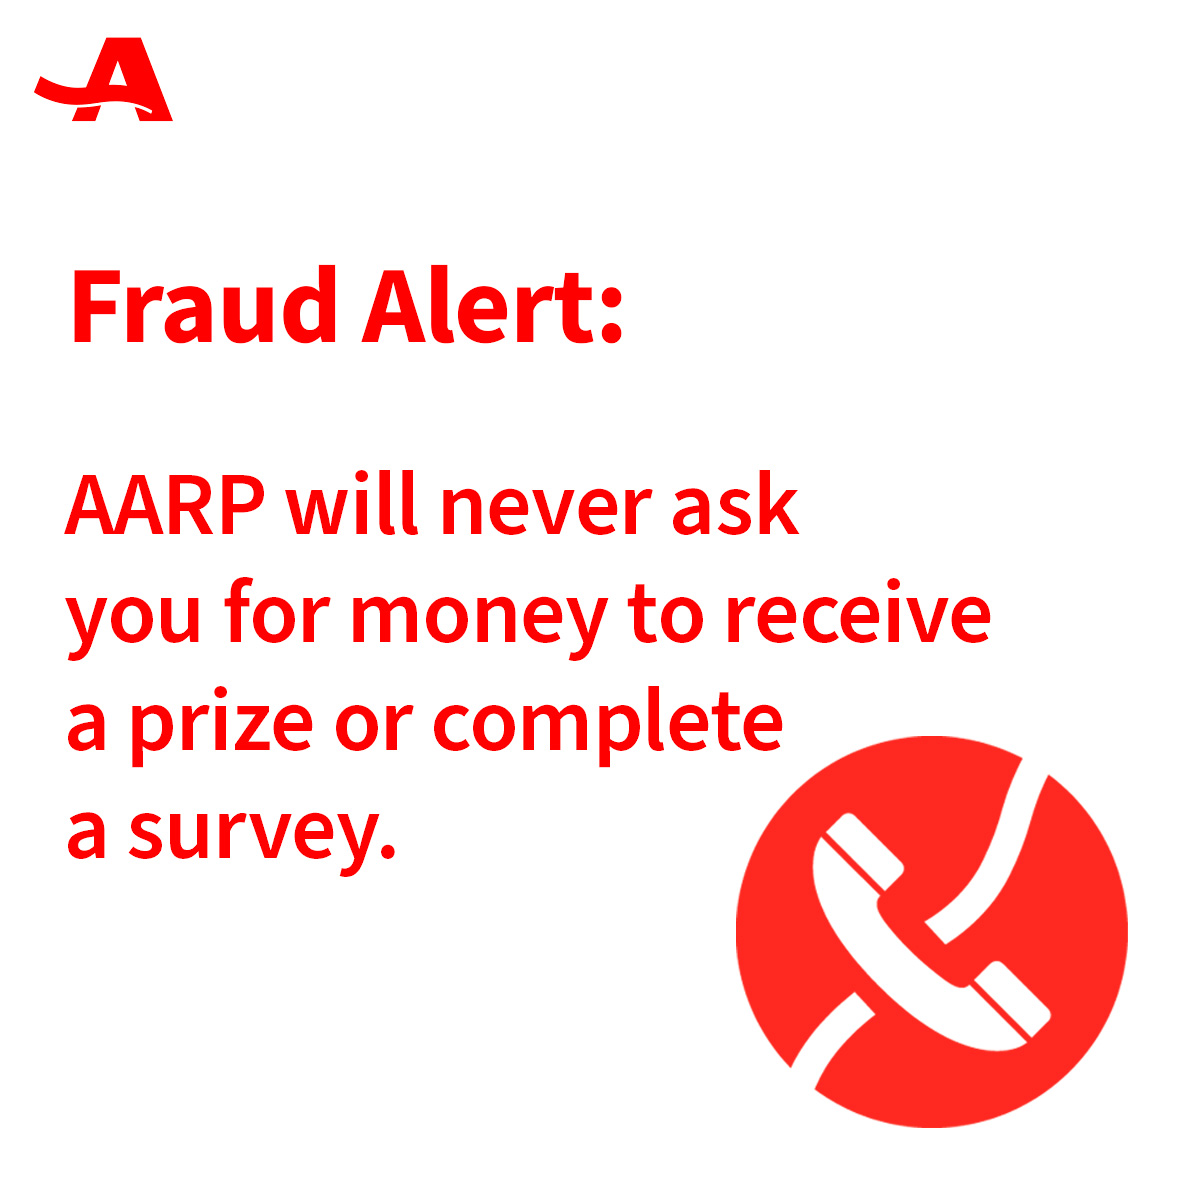 AARP will never call, email or mail you a letter asking for money to receive a prize or complete a survey. If this happens to you, do not respond. Contact @aarpfraudwatch to report the scam